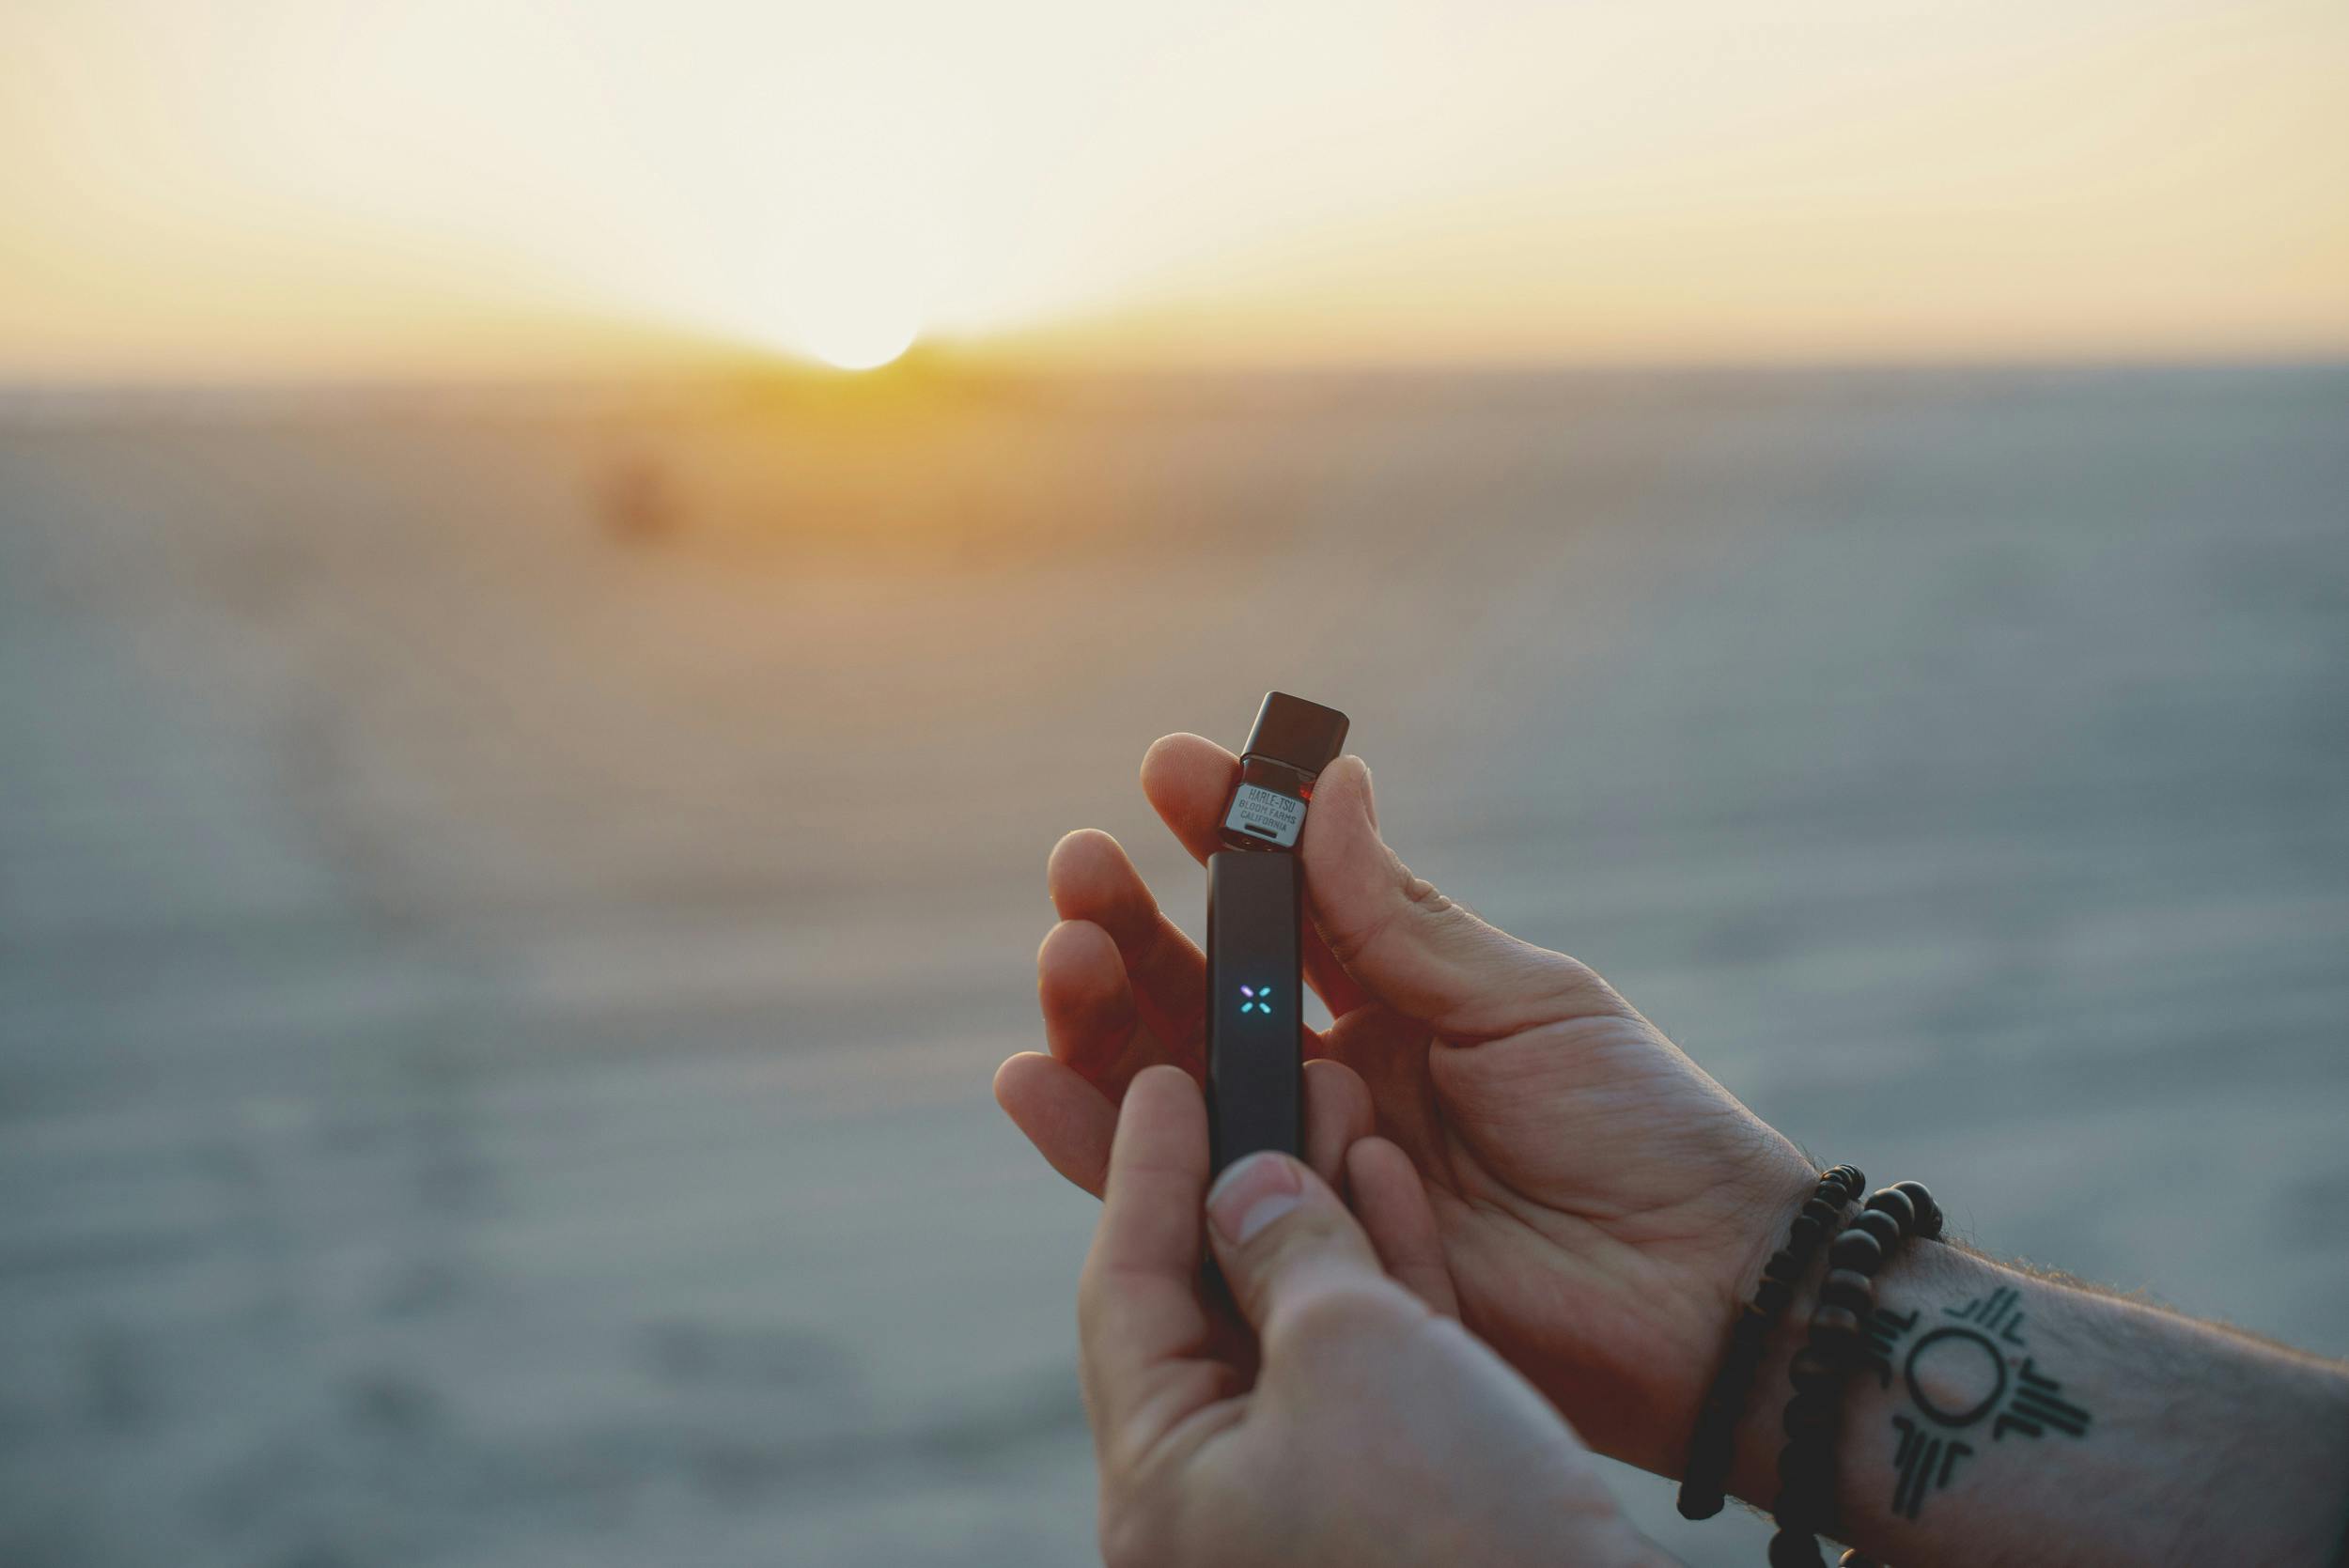 Hands holding one of the best weed vaporizers, the PAX ERA, in front of a sunset on the beach.